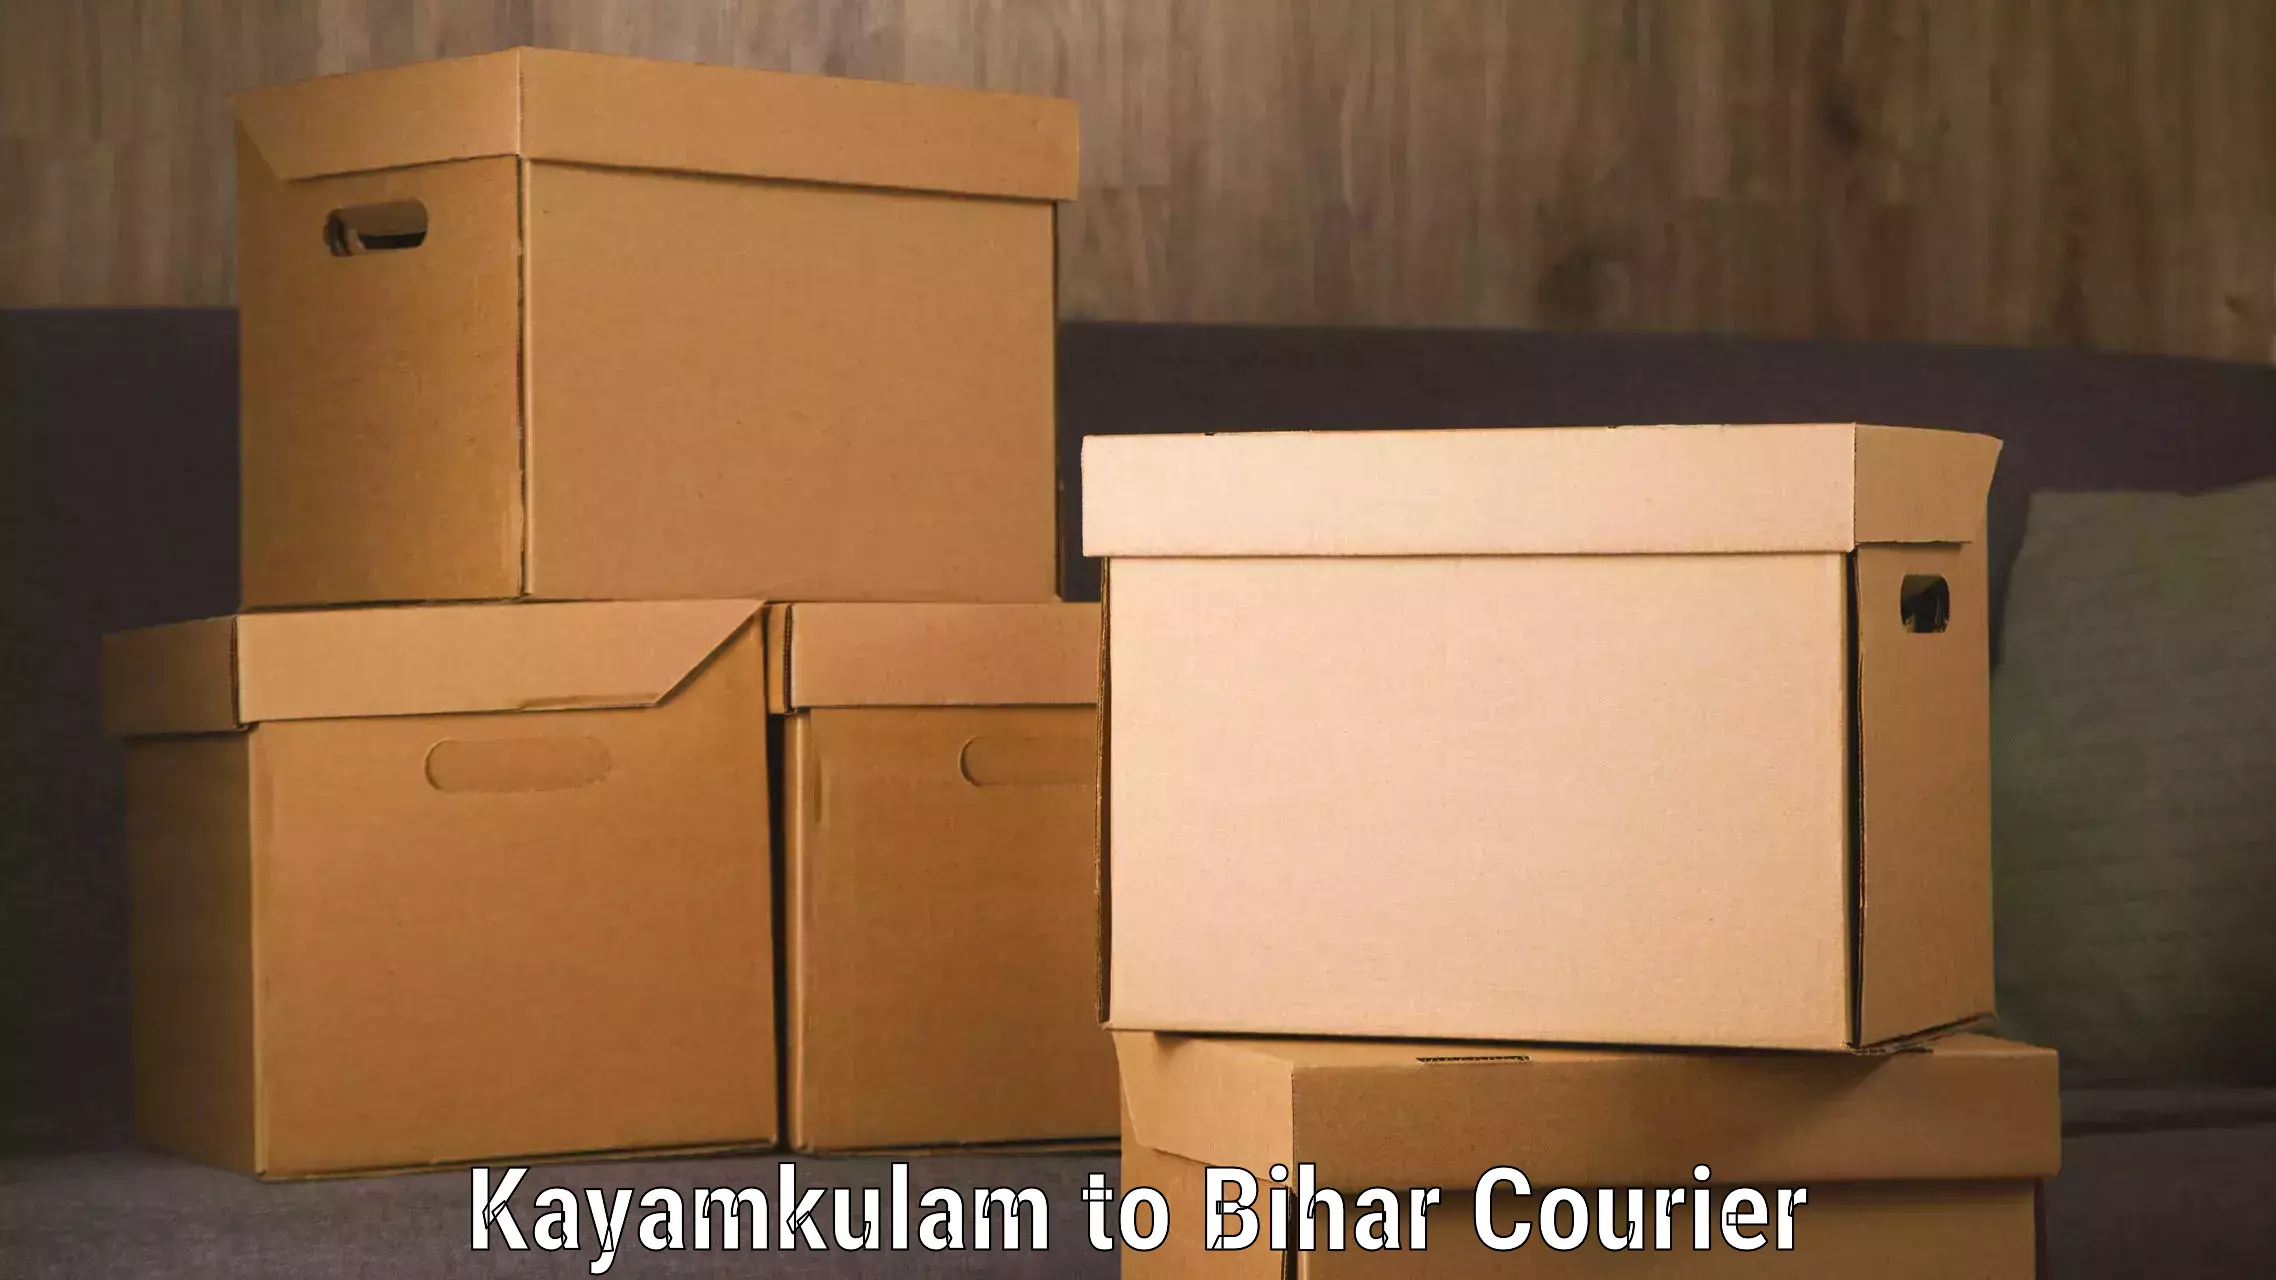 Reliable courier service Kayamkulam to Bhorey